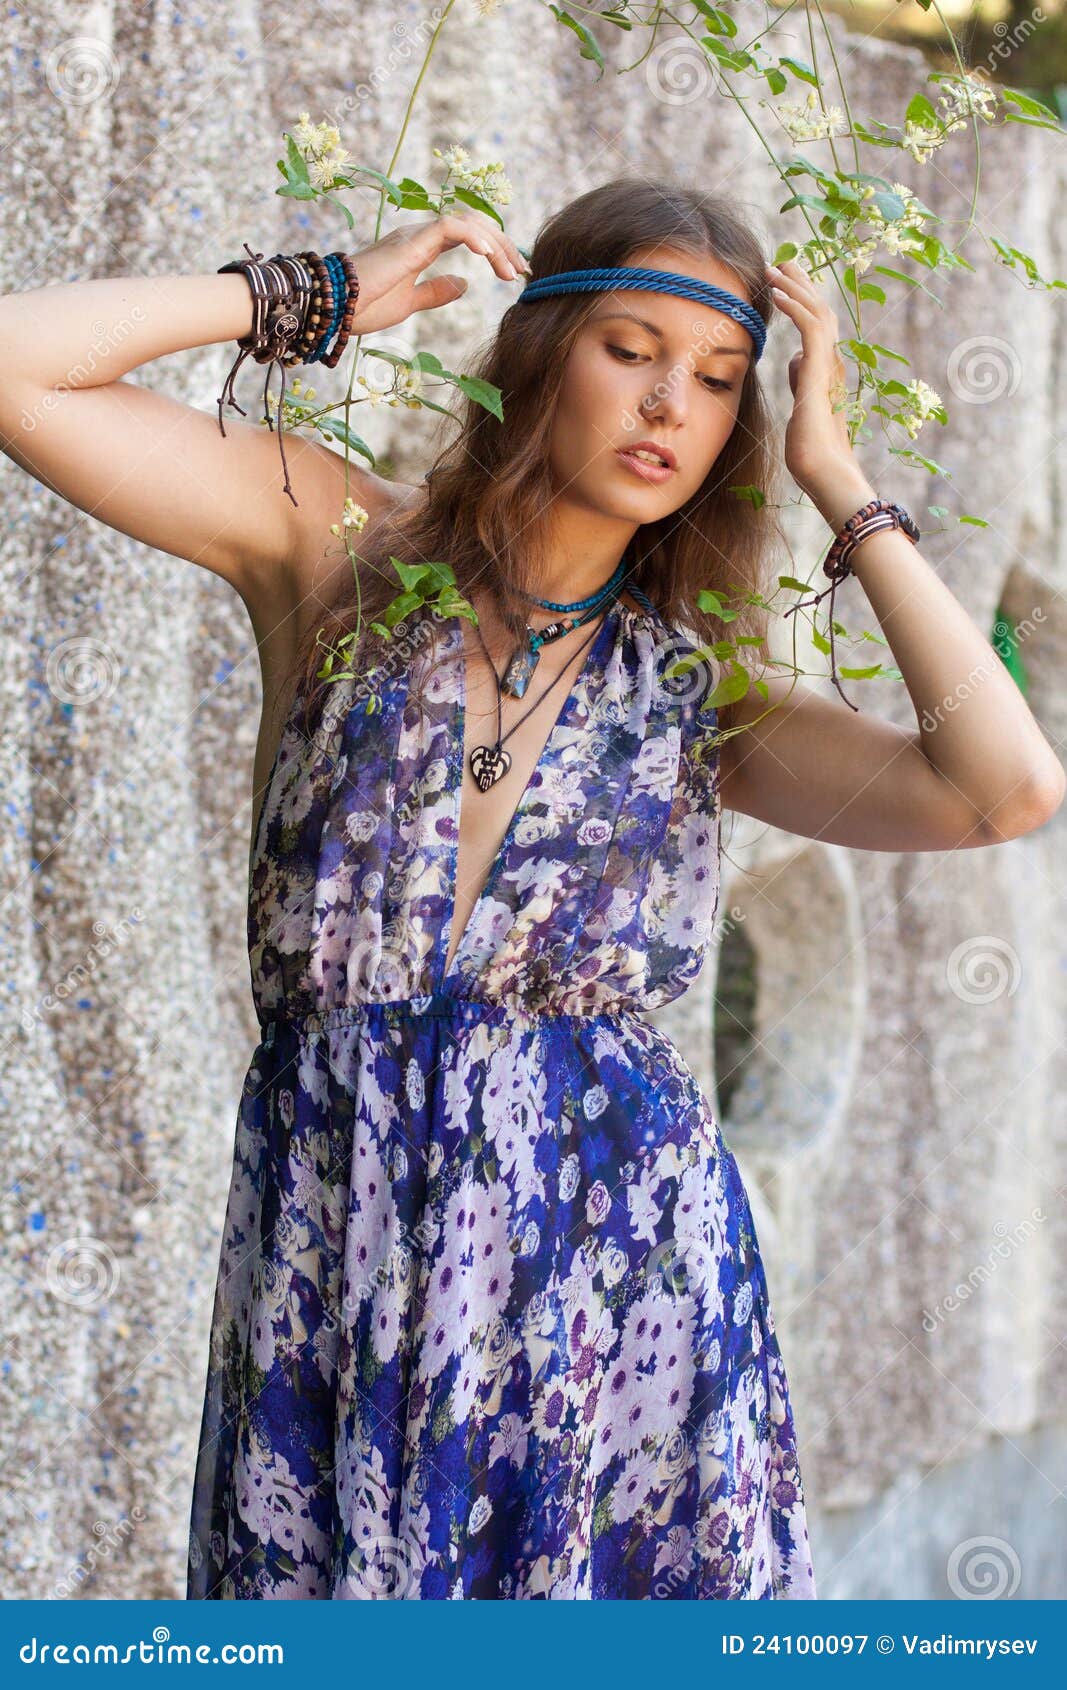 Woman in a Sundress at the Stone Wall Stock Image - Image of necklace ...